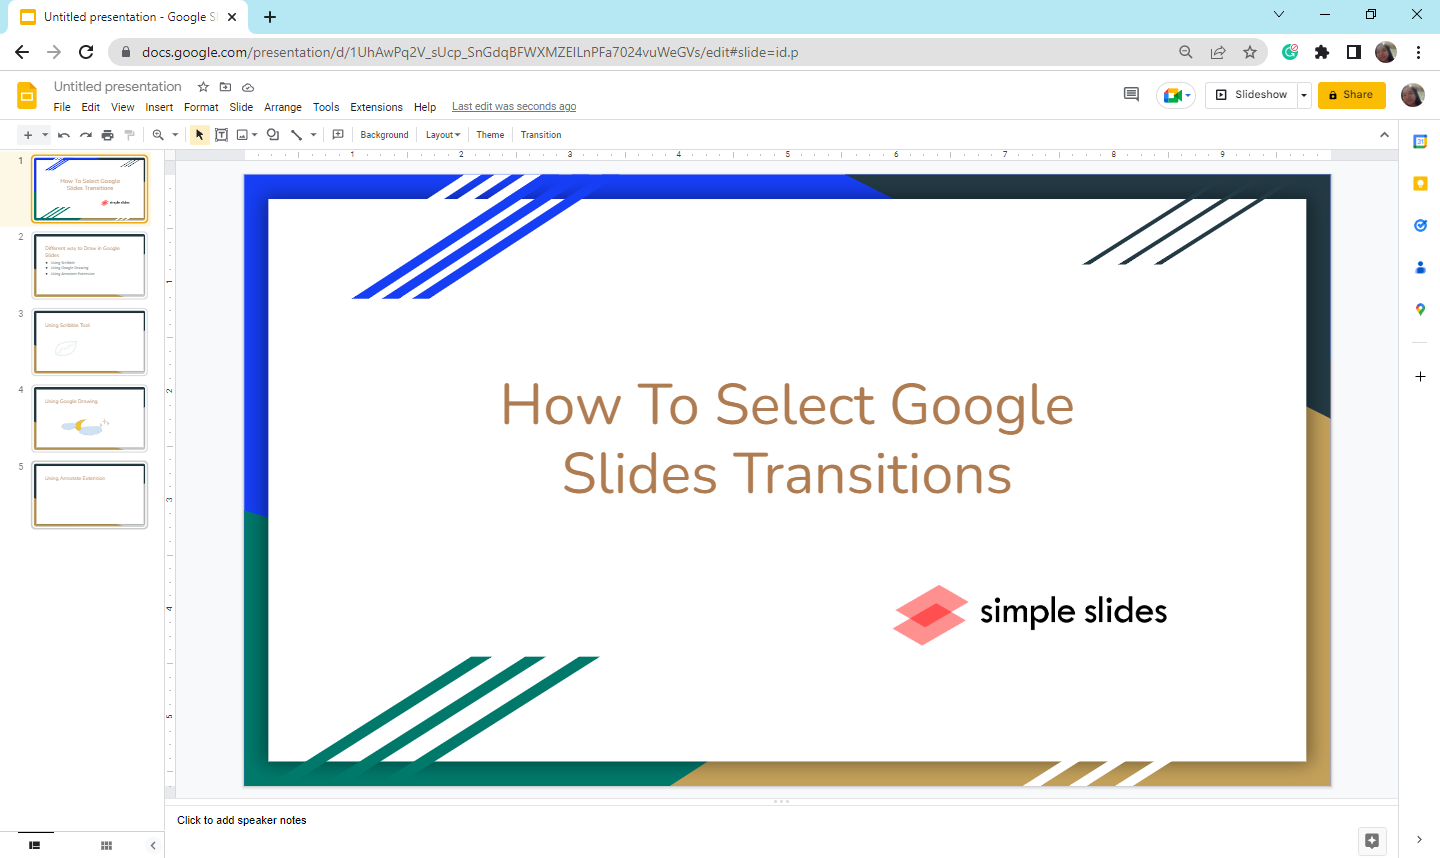 learn-how-to-select-google-slides-transitions